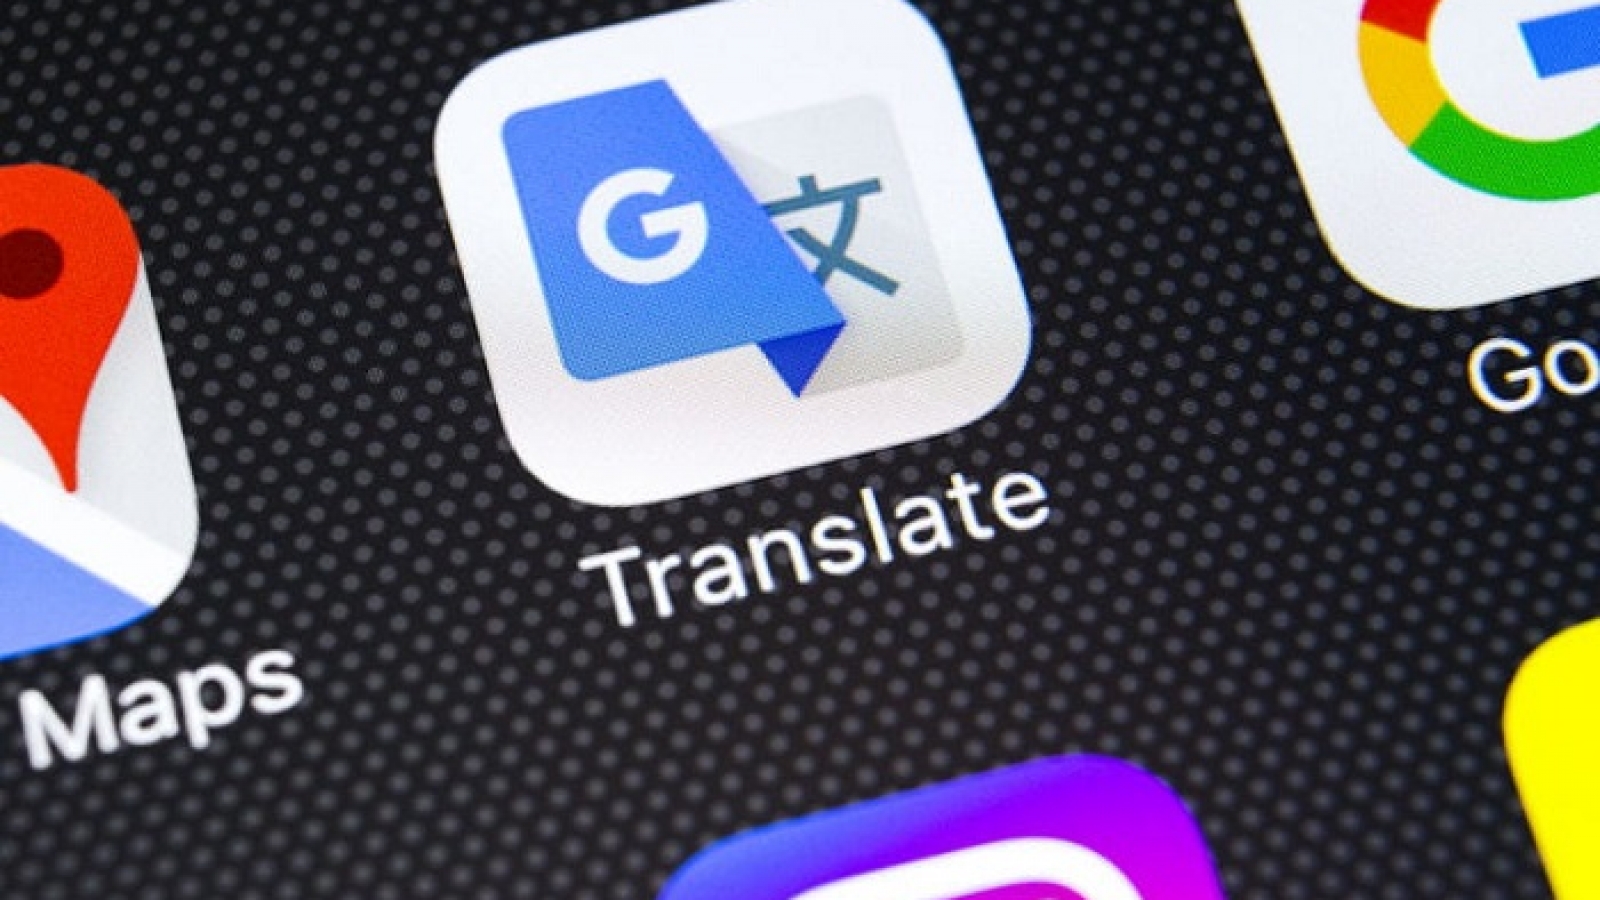 How to translate text messages on android